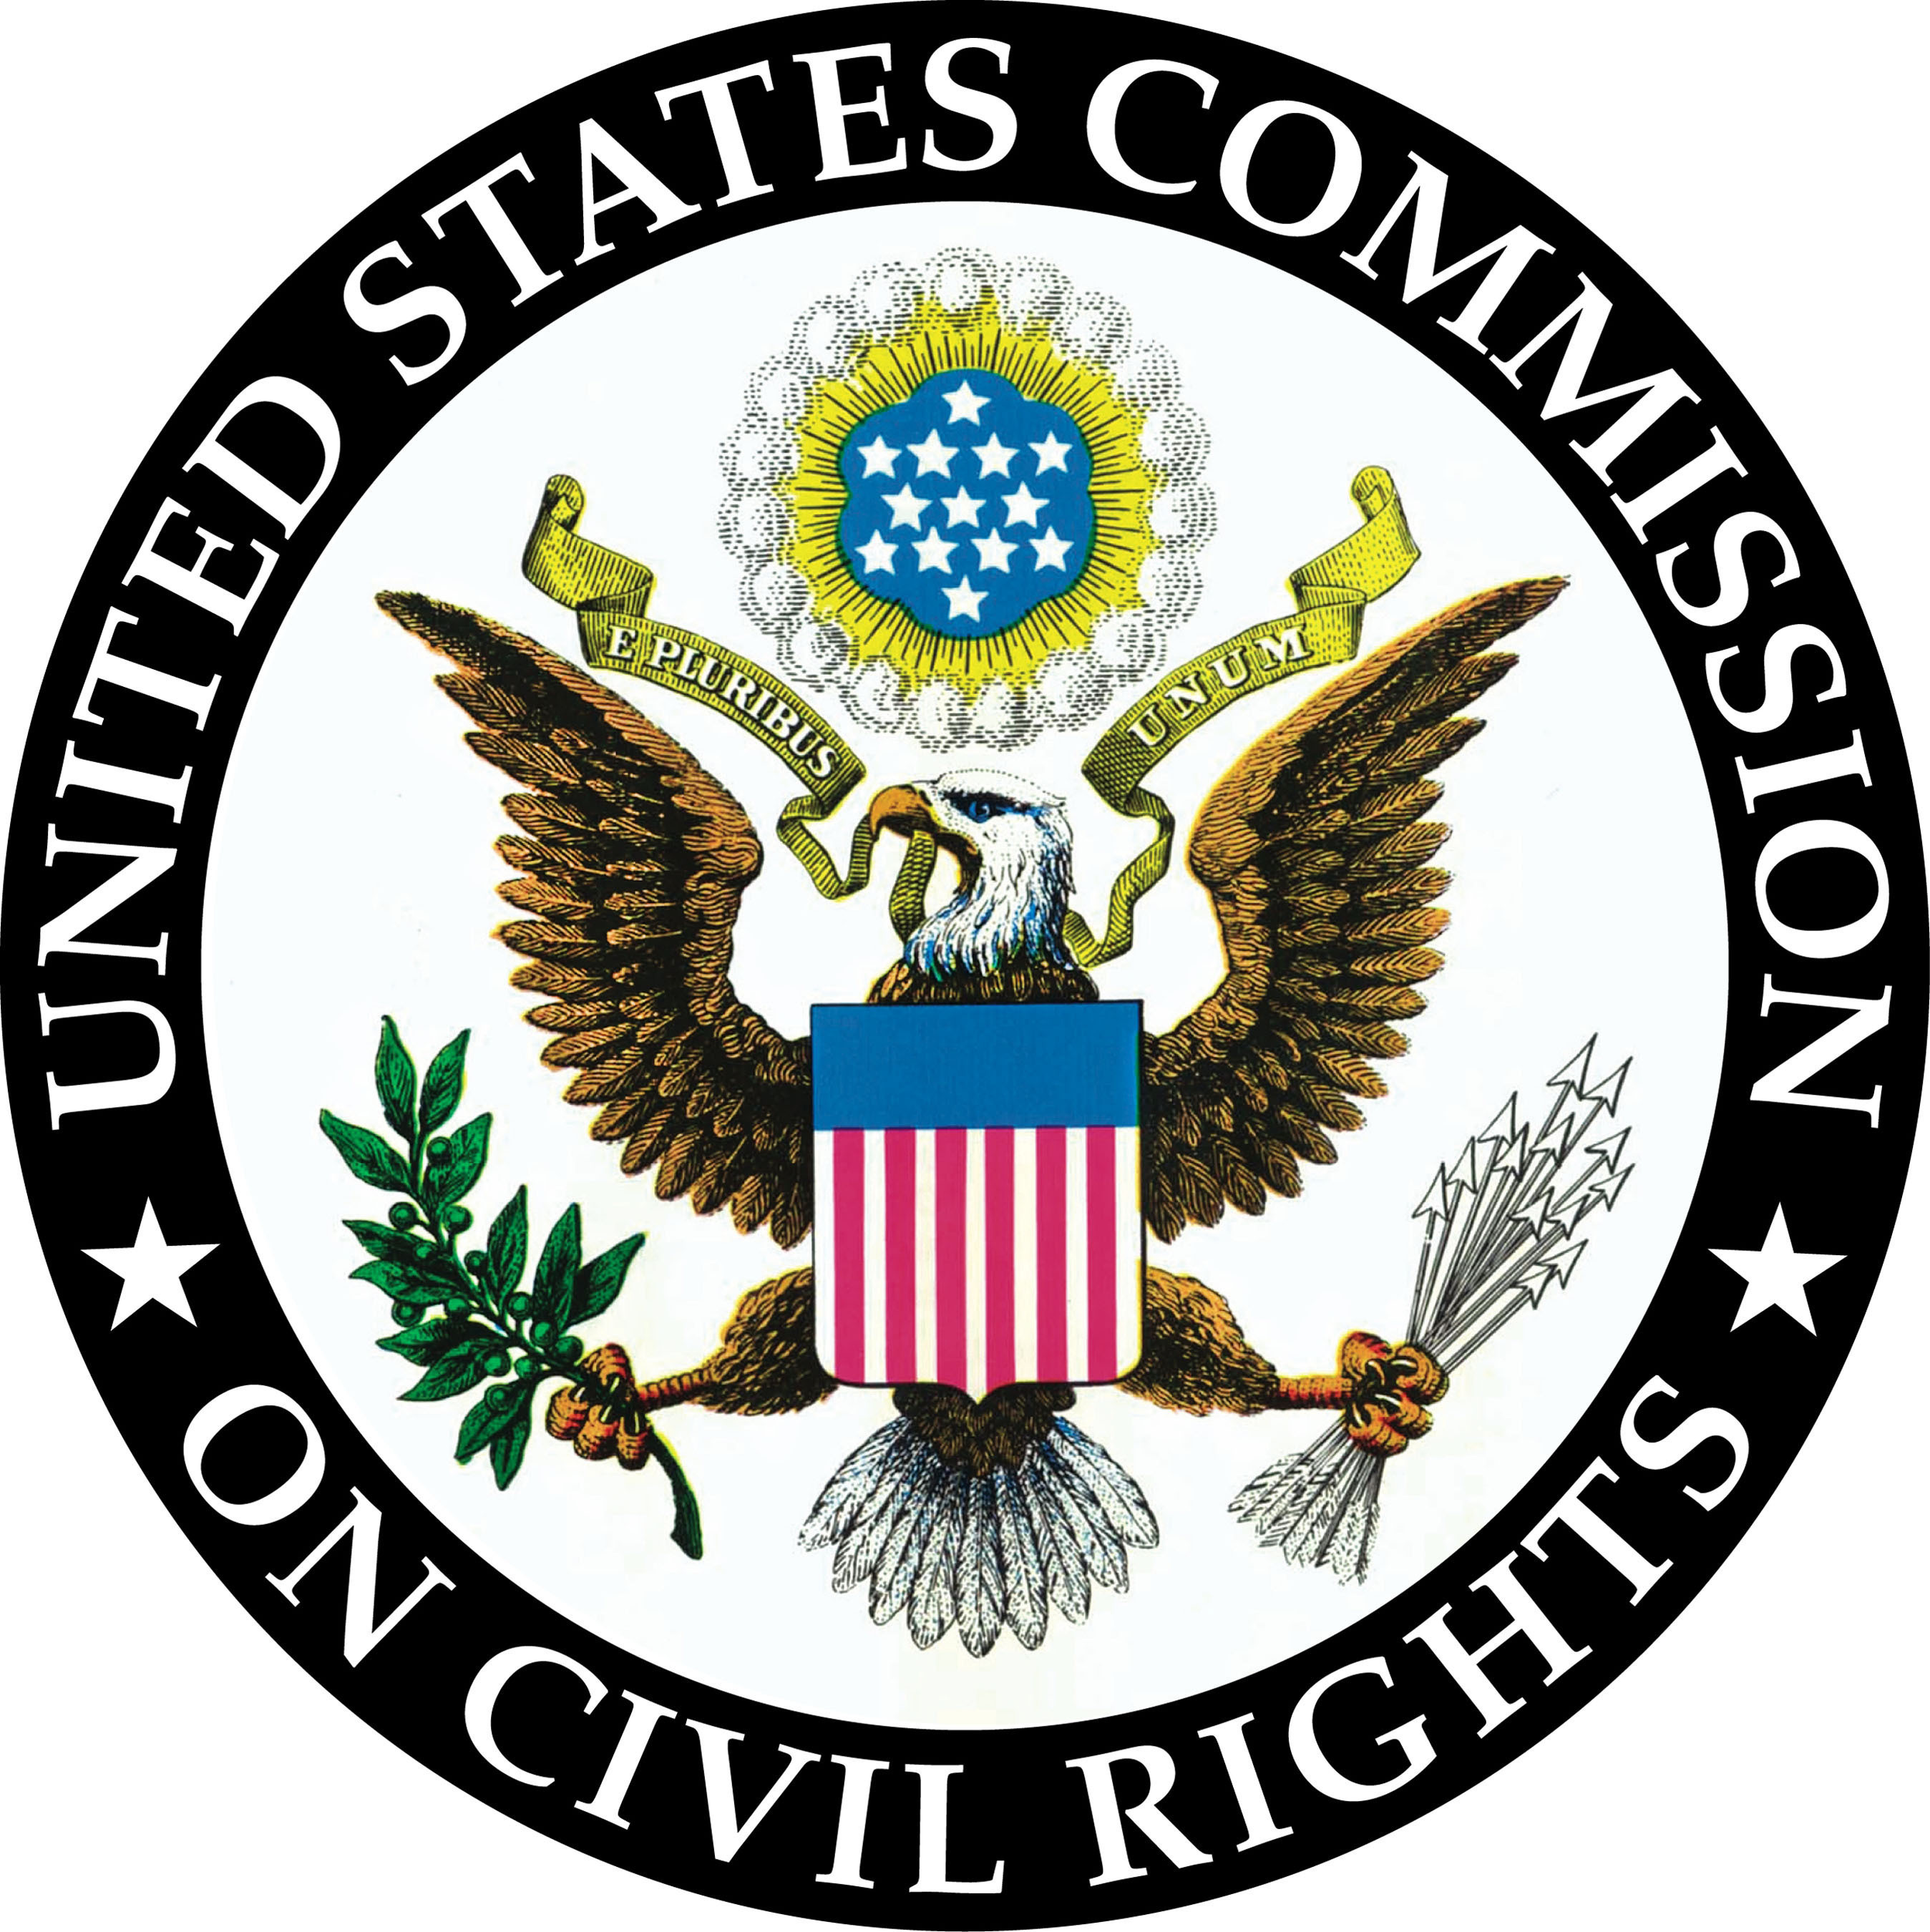 usccr: The U. S. Commission on Civil Rights logo